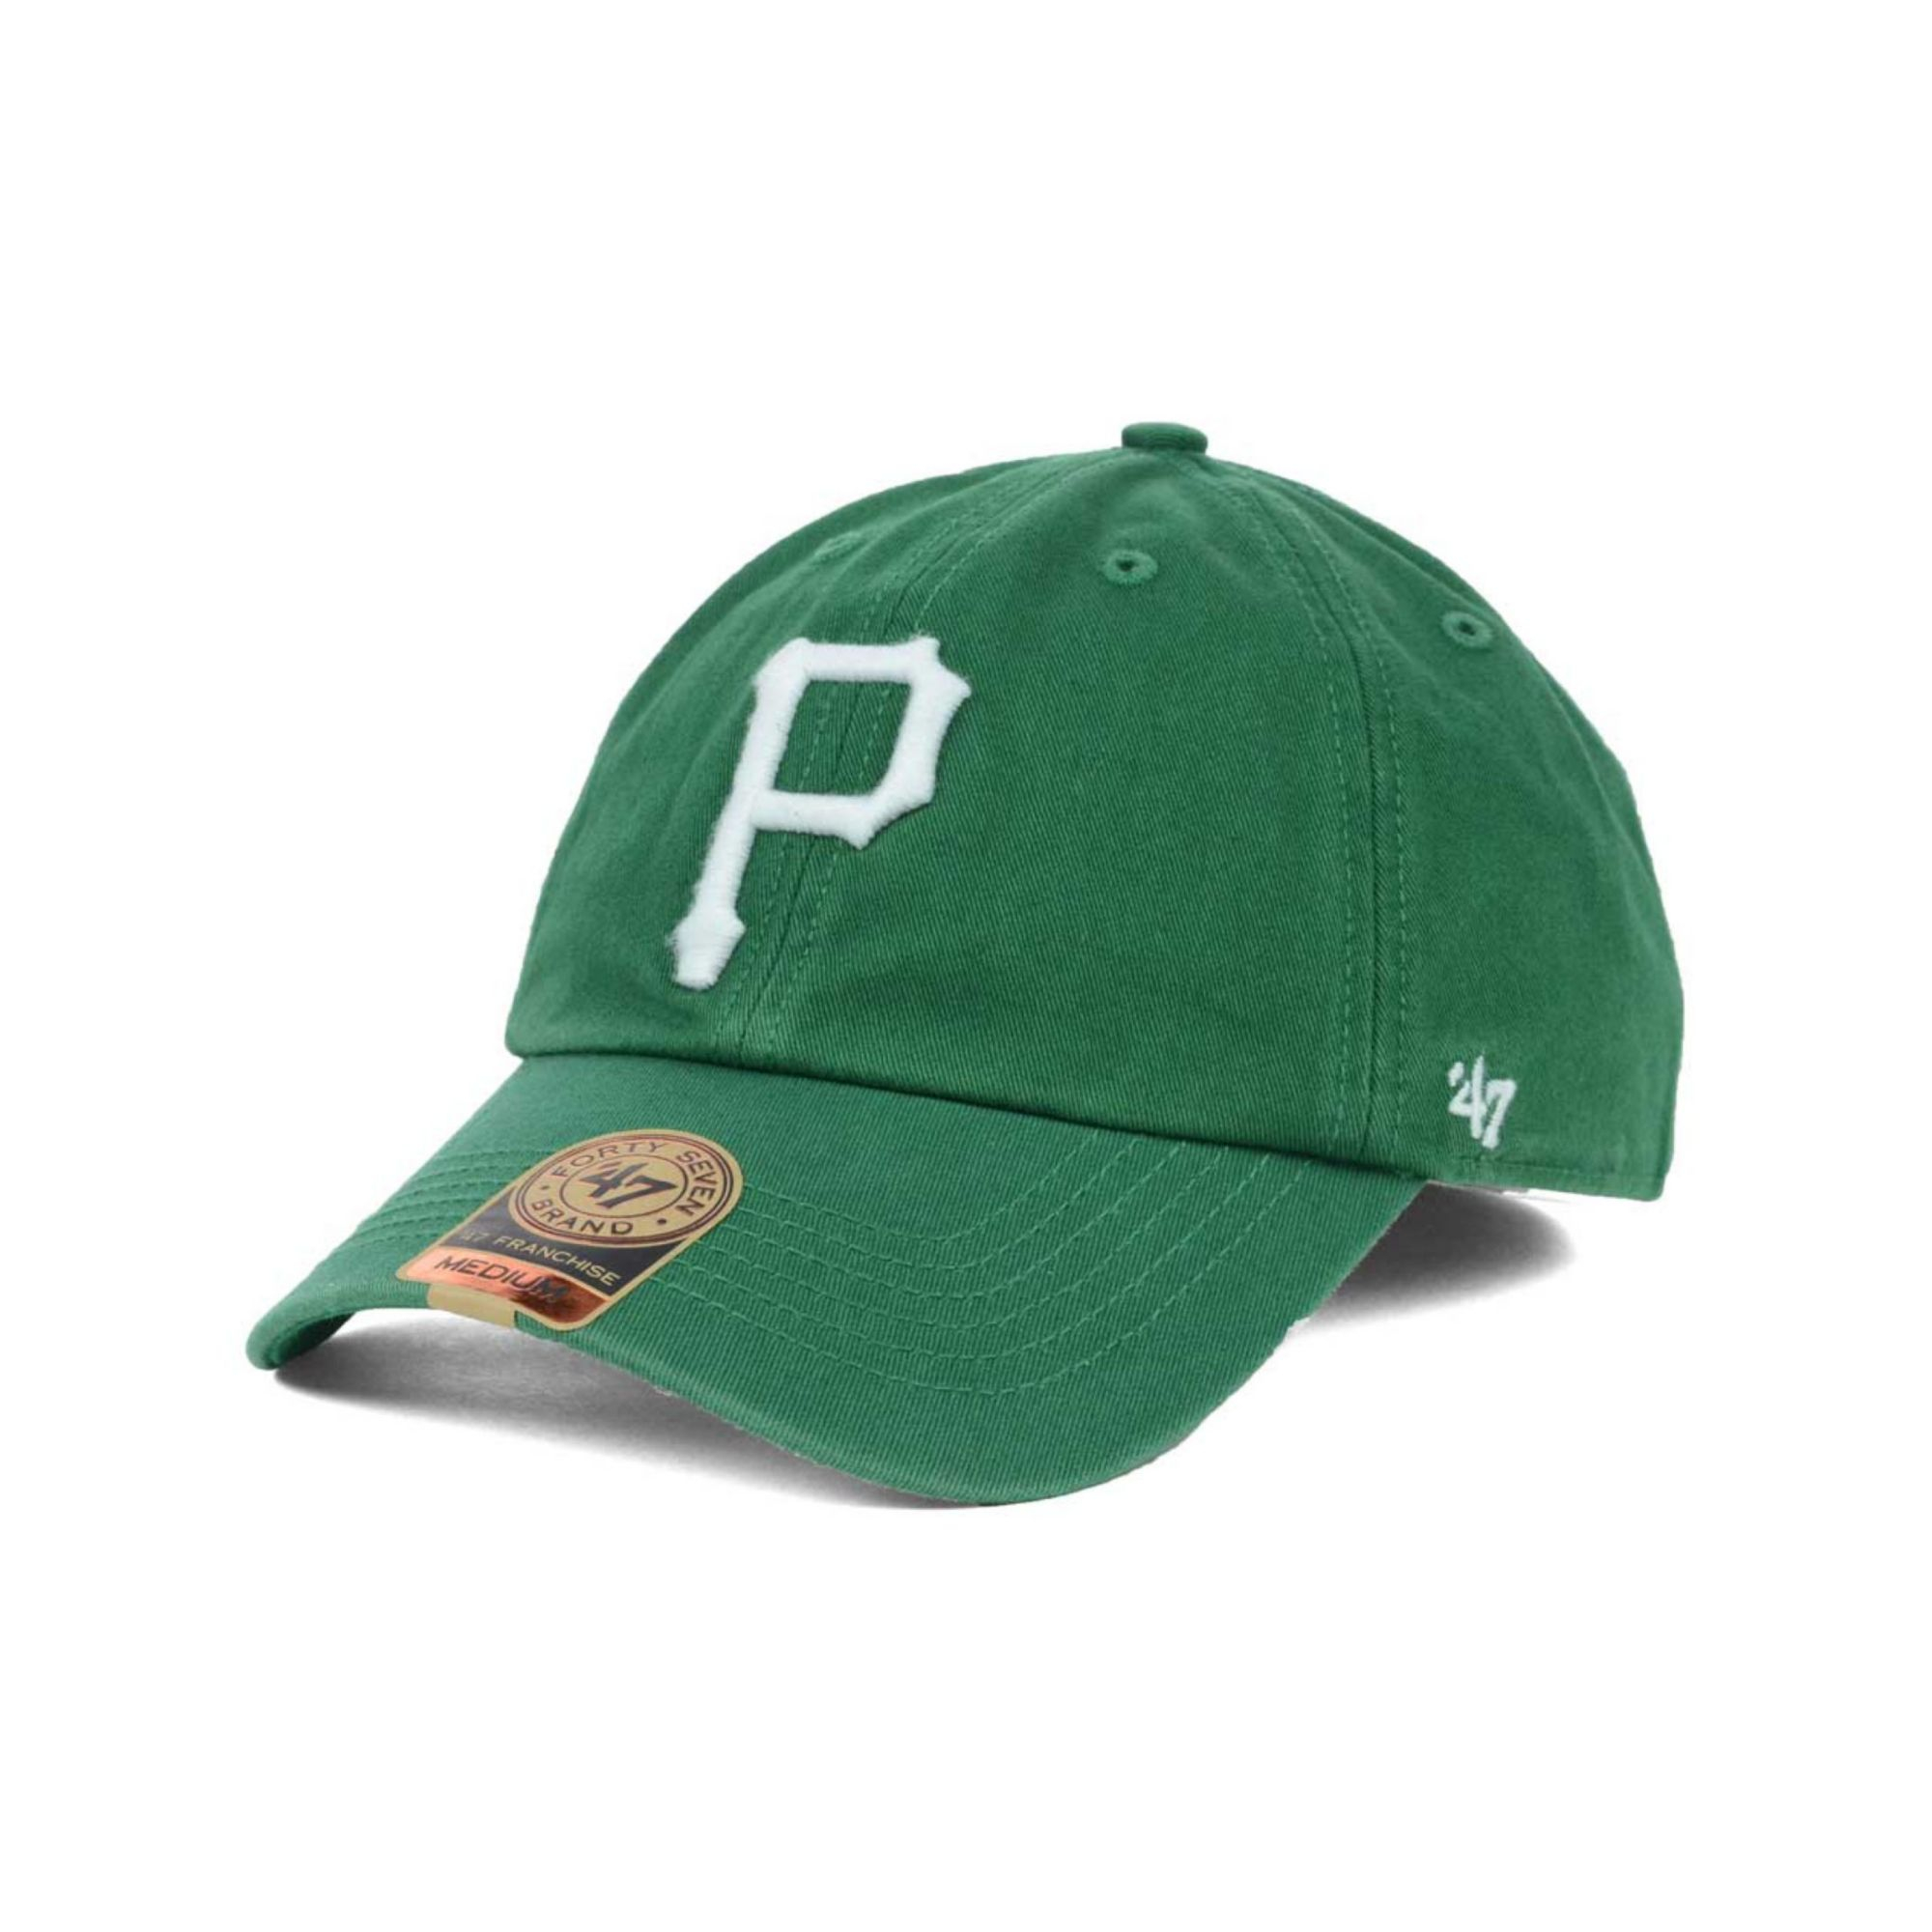 Lyst - 47 Brand Pittsburgh Pirates Mlb Kelly 47 Franchise Cap in Green ...